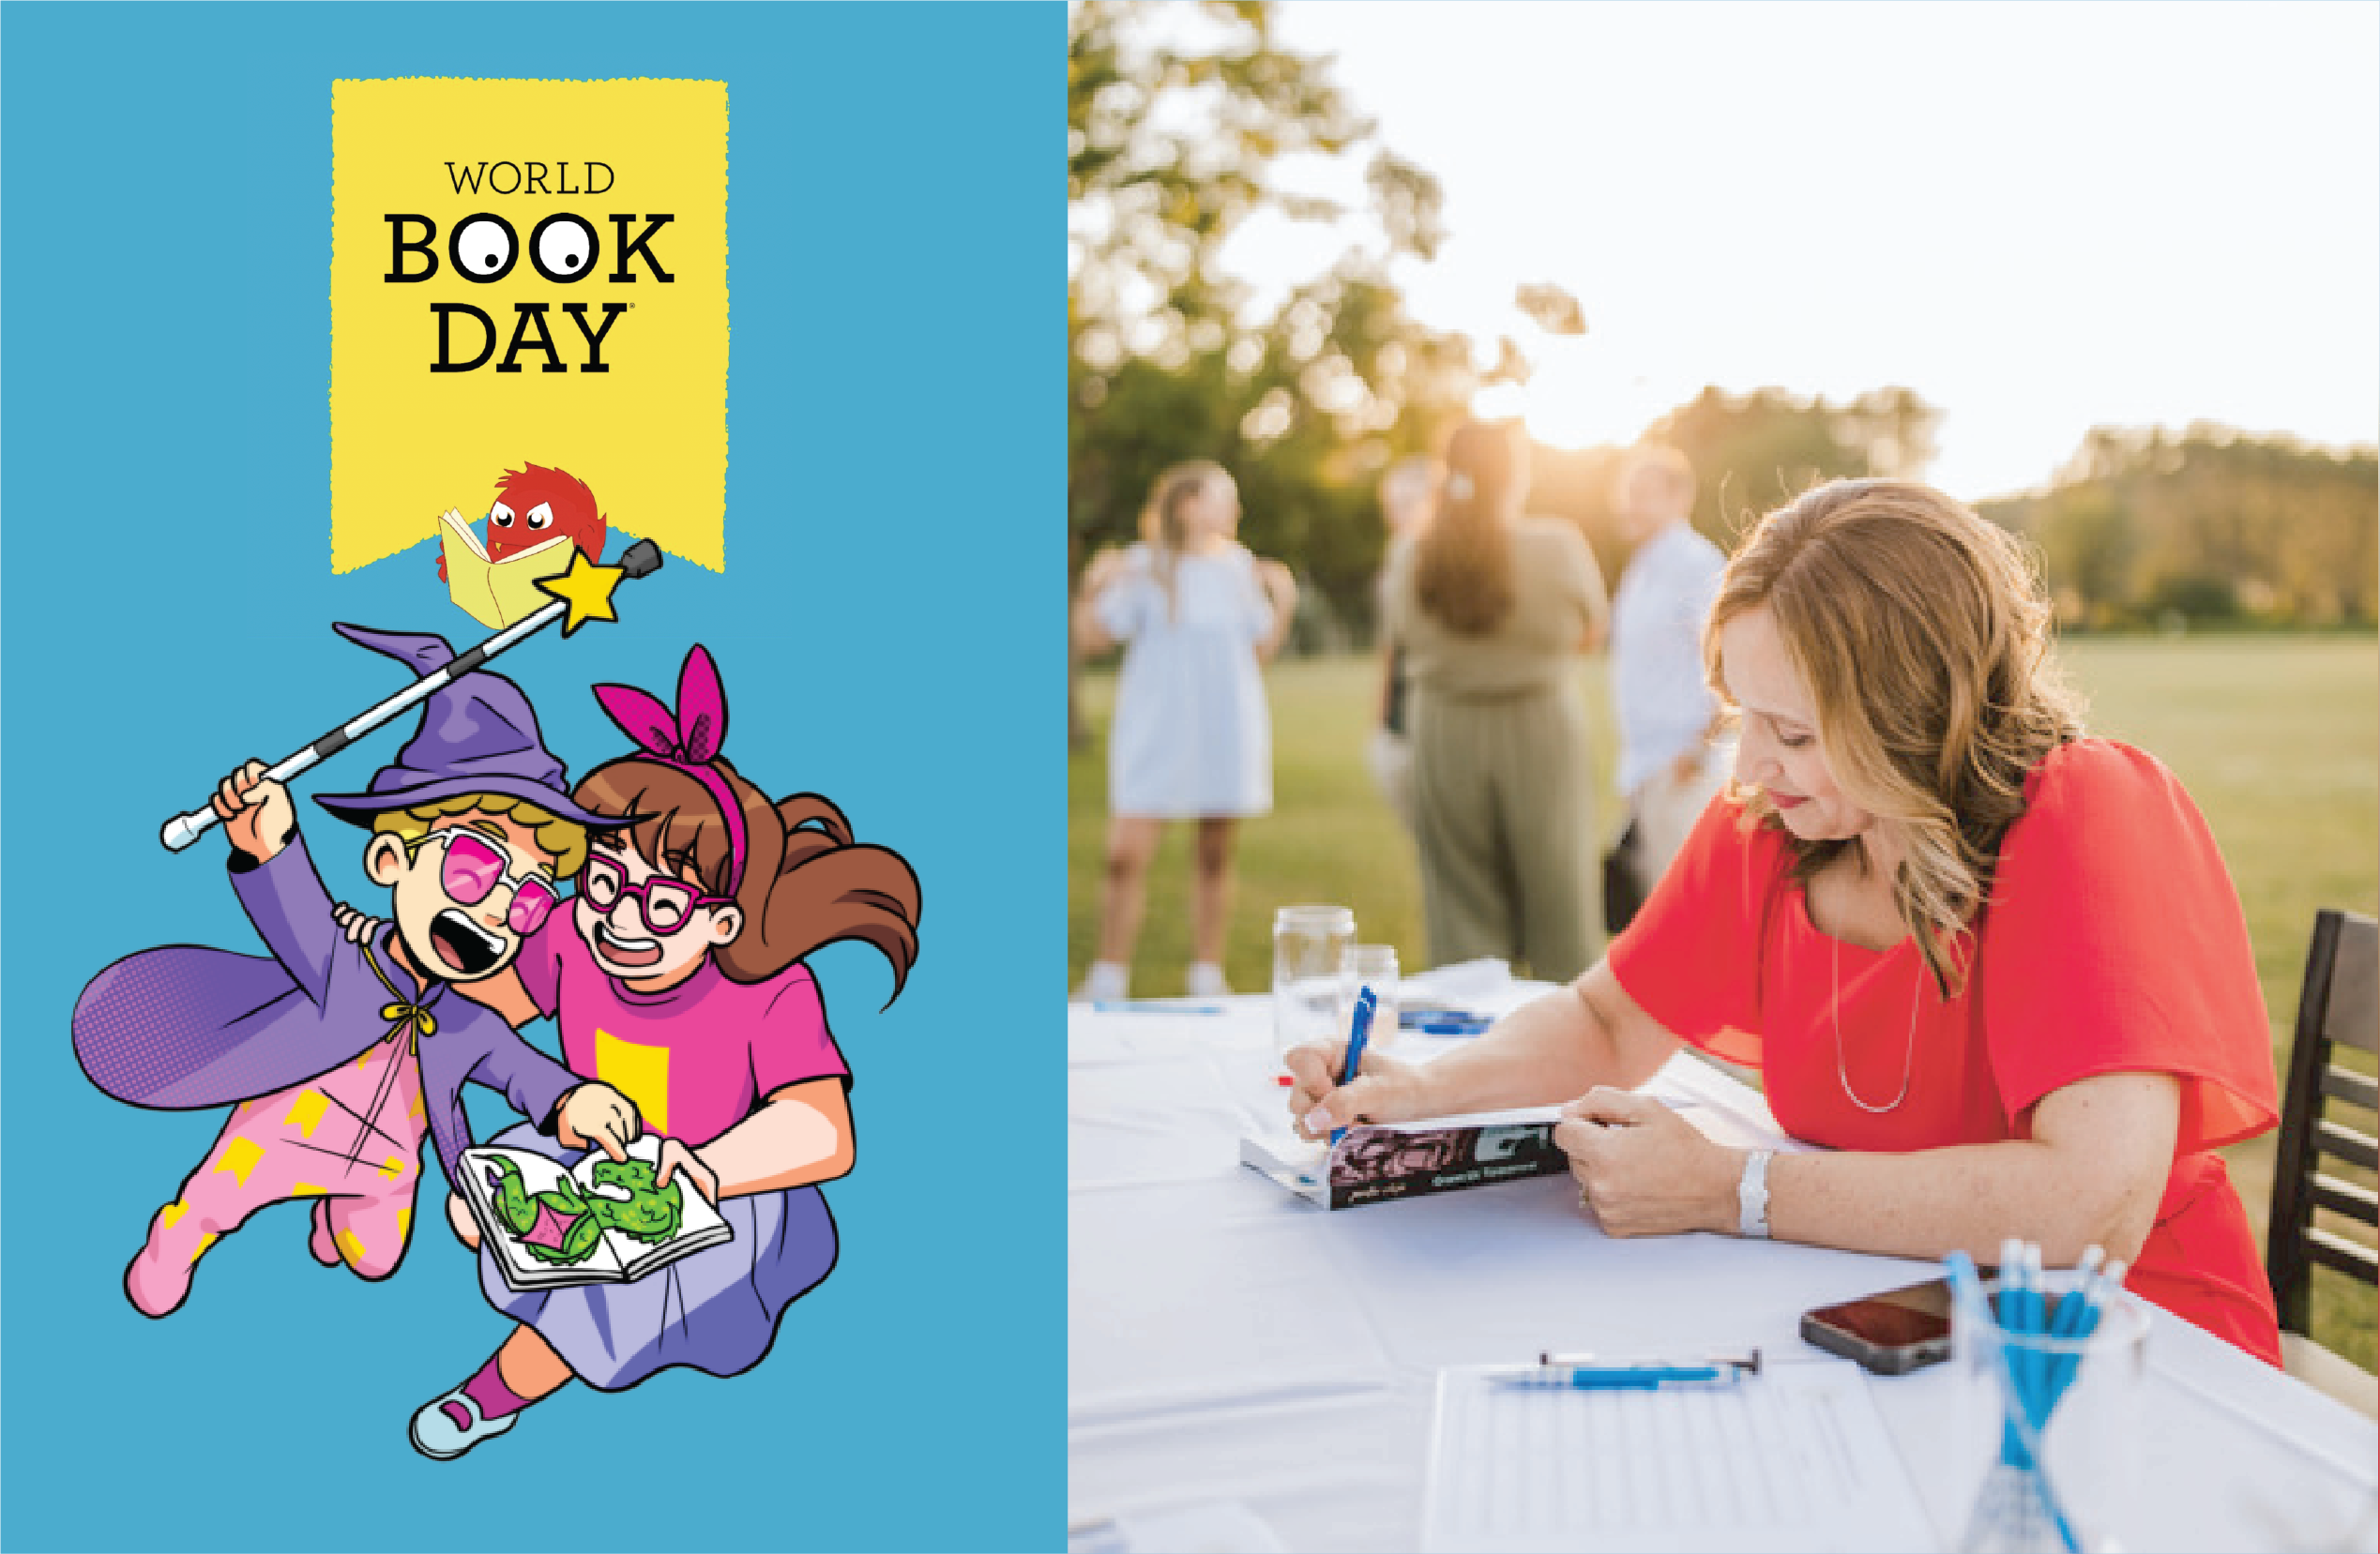 Woman outside signing book at table and comic-like graphic for World Book Day